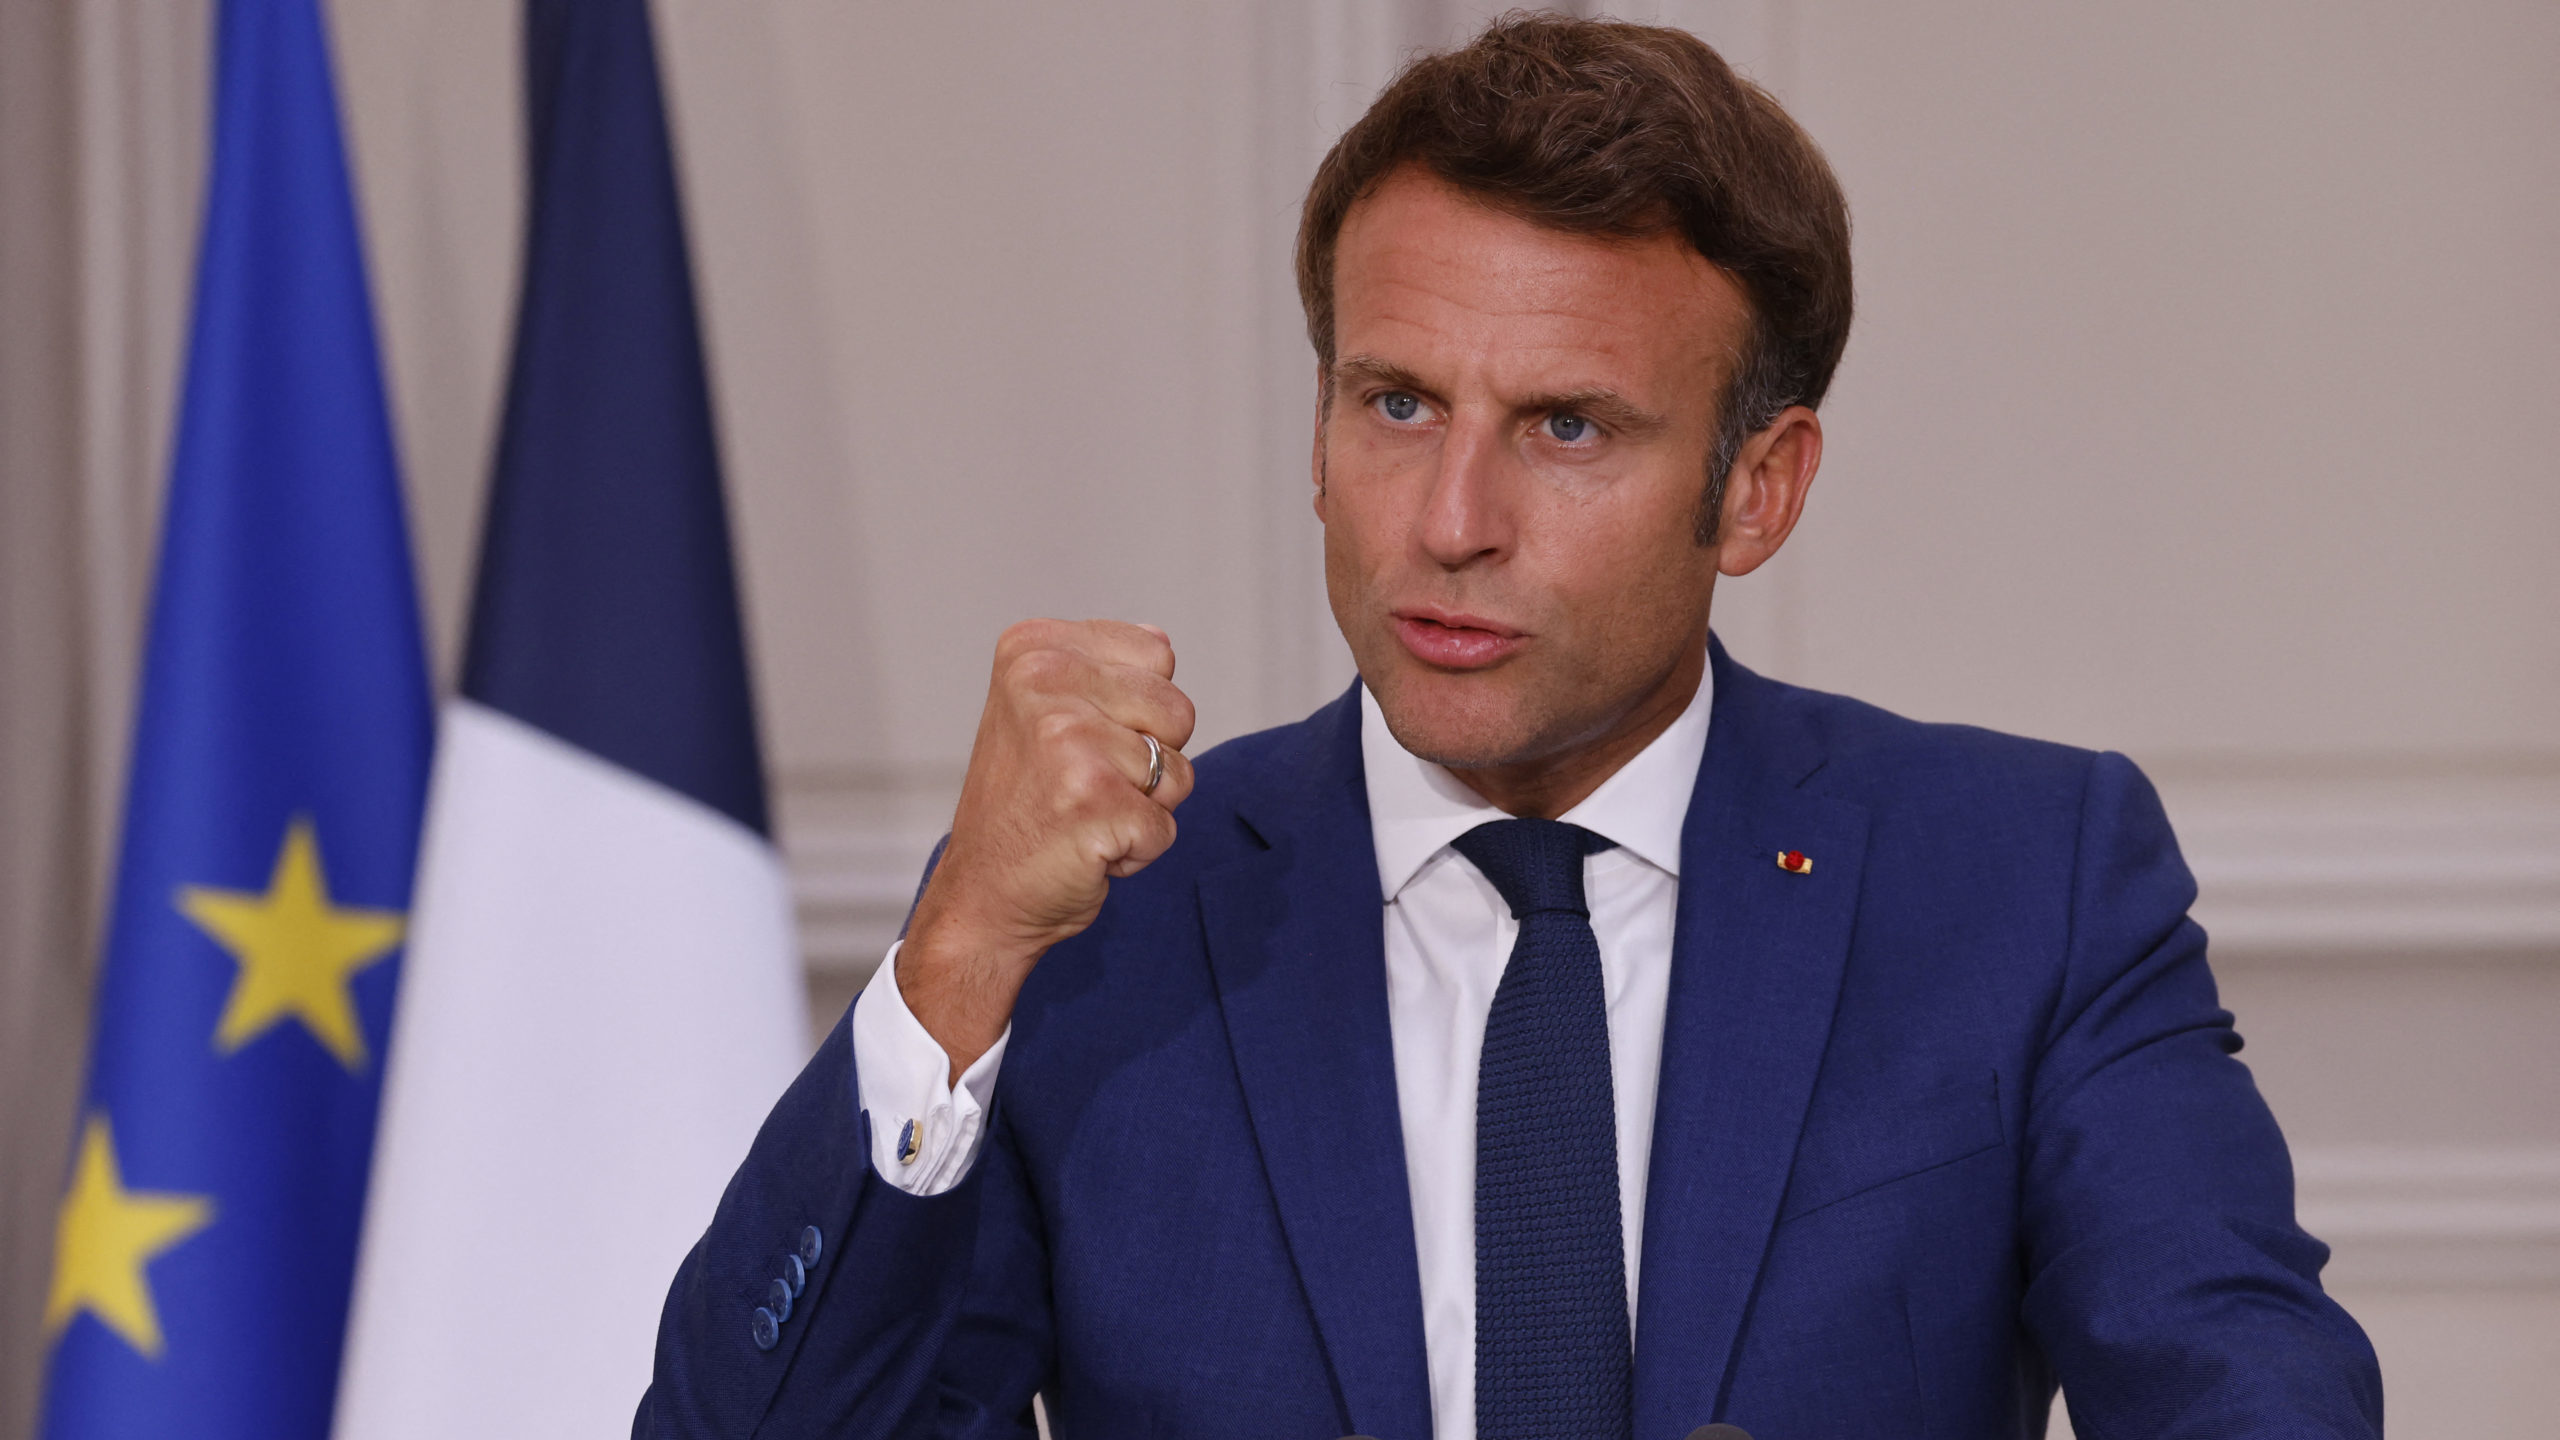 France's President Emmanuel Macron addresses media following a conference with Germany's Chancellor Olaf Scholz on the energy crisis via video link, at the Elysee presidential palace in Paris on September 5, 2022. (Photo by Ludovic MARIN / POOL / AFP)